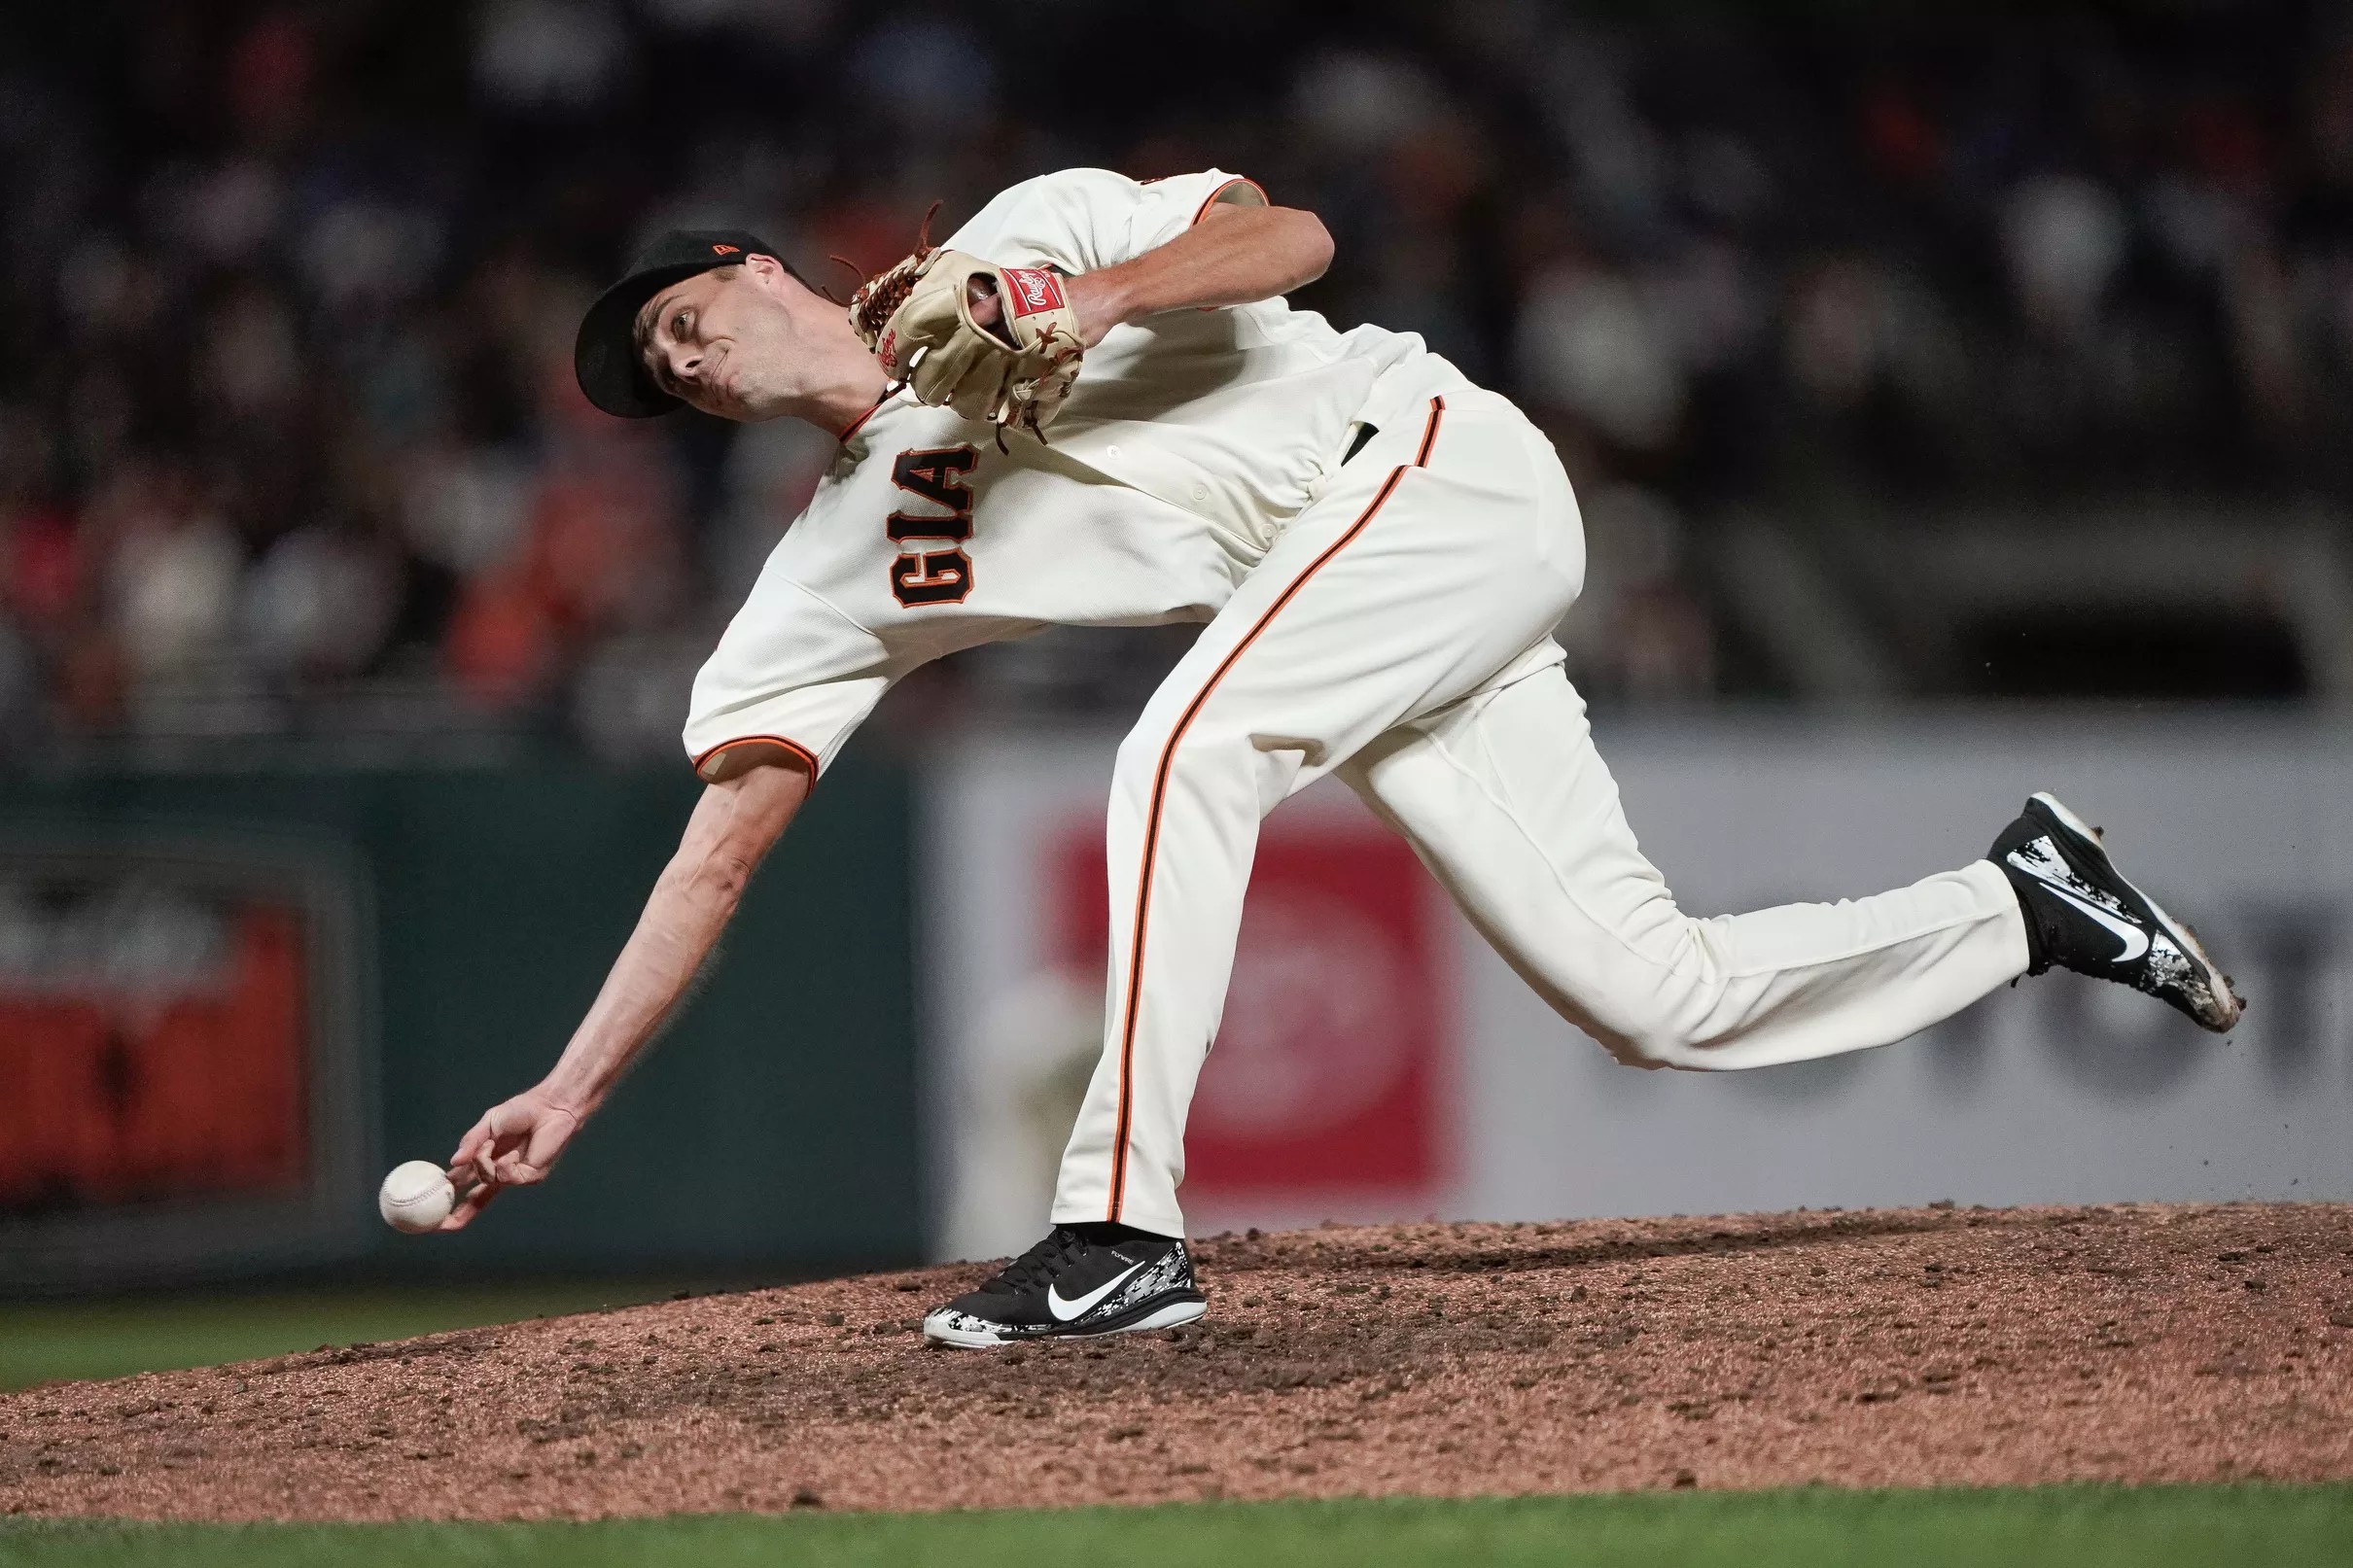 Tyler Rogers submarined his way into Giants fans’ hearts this year